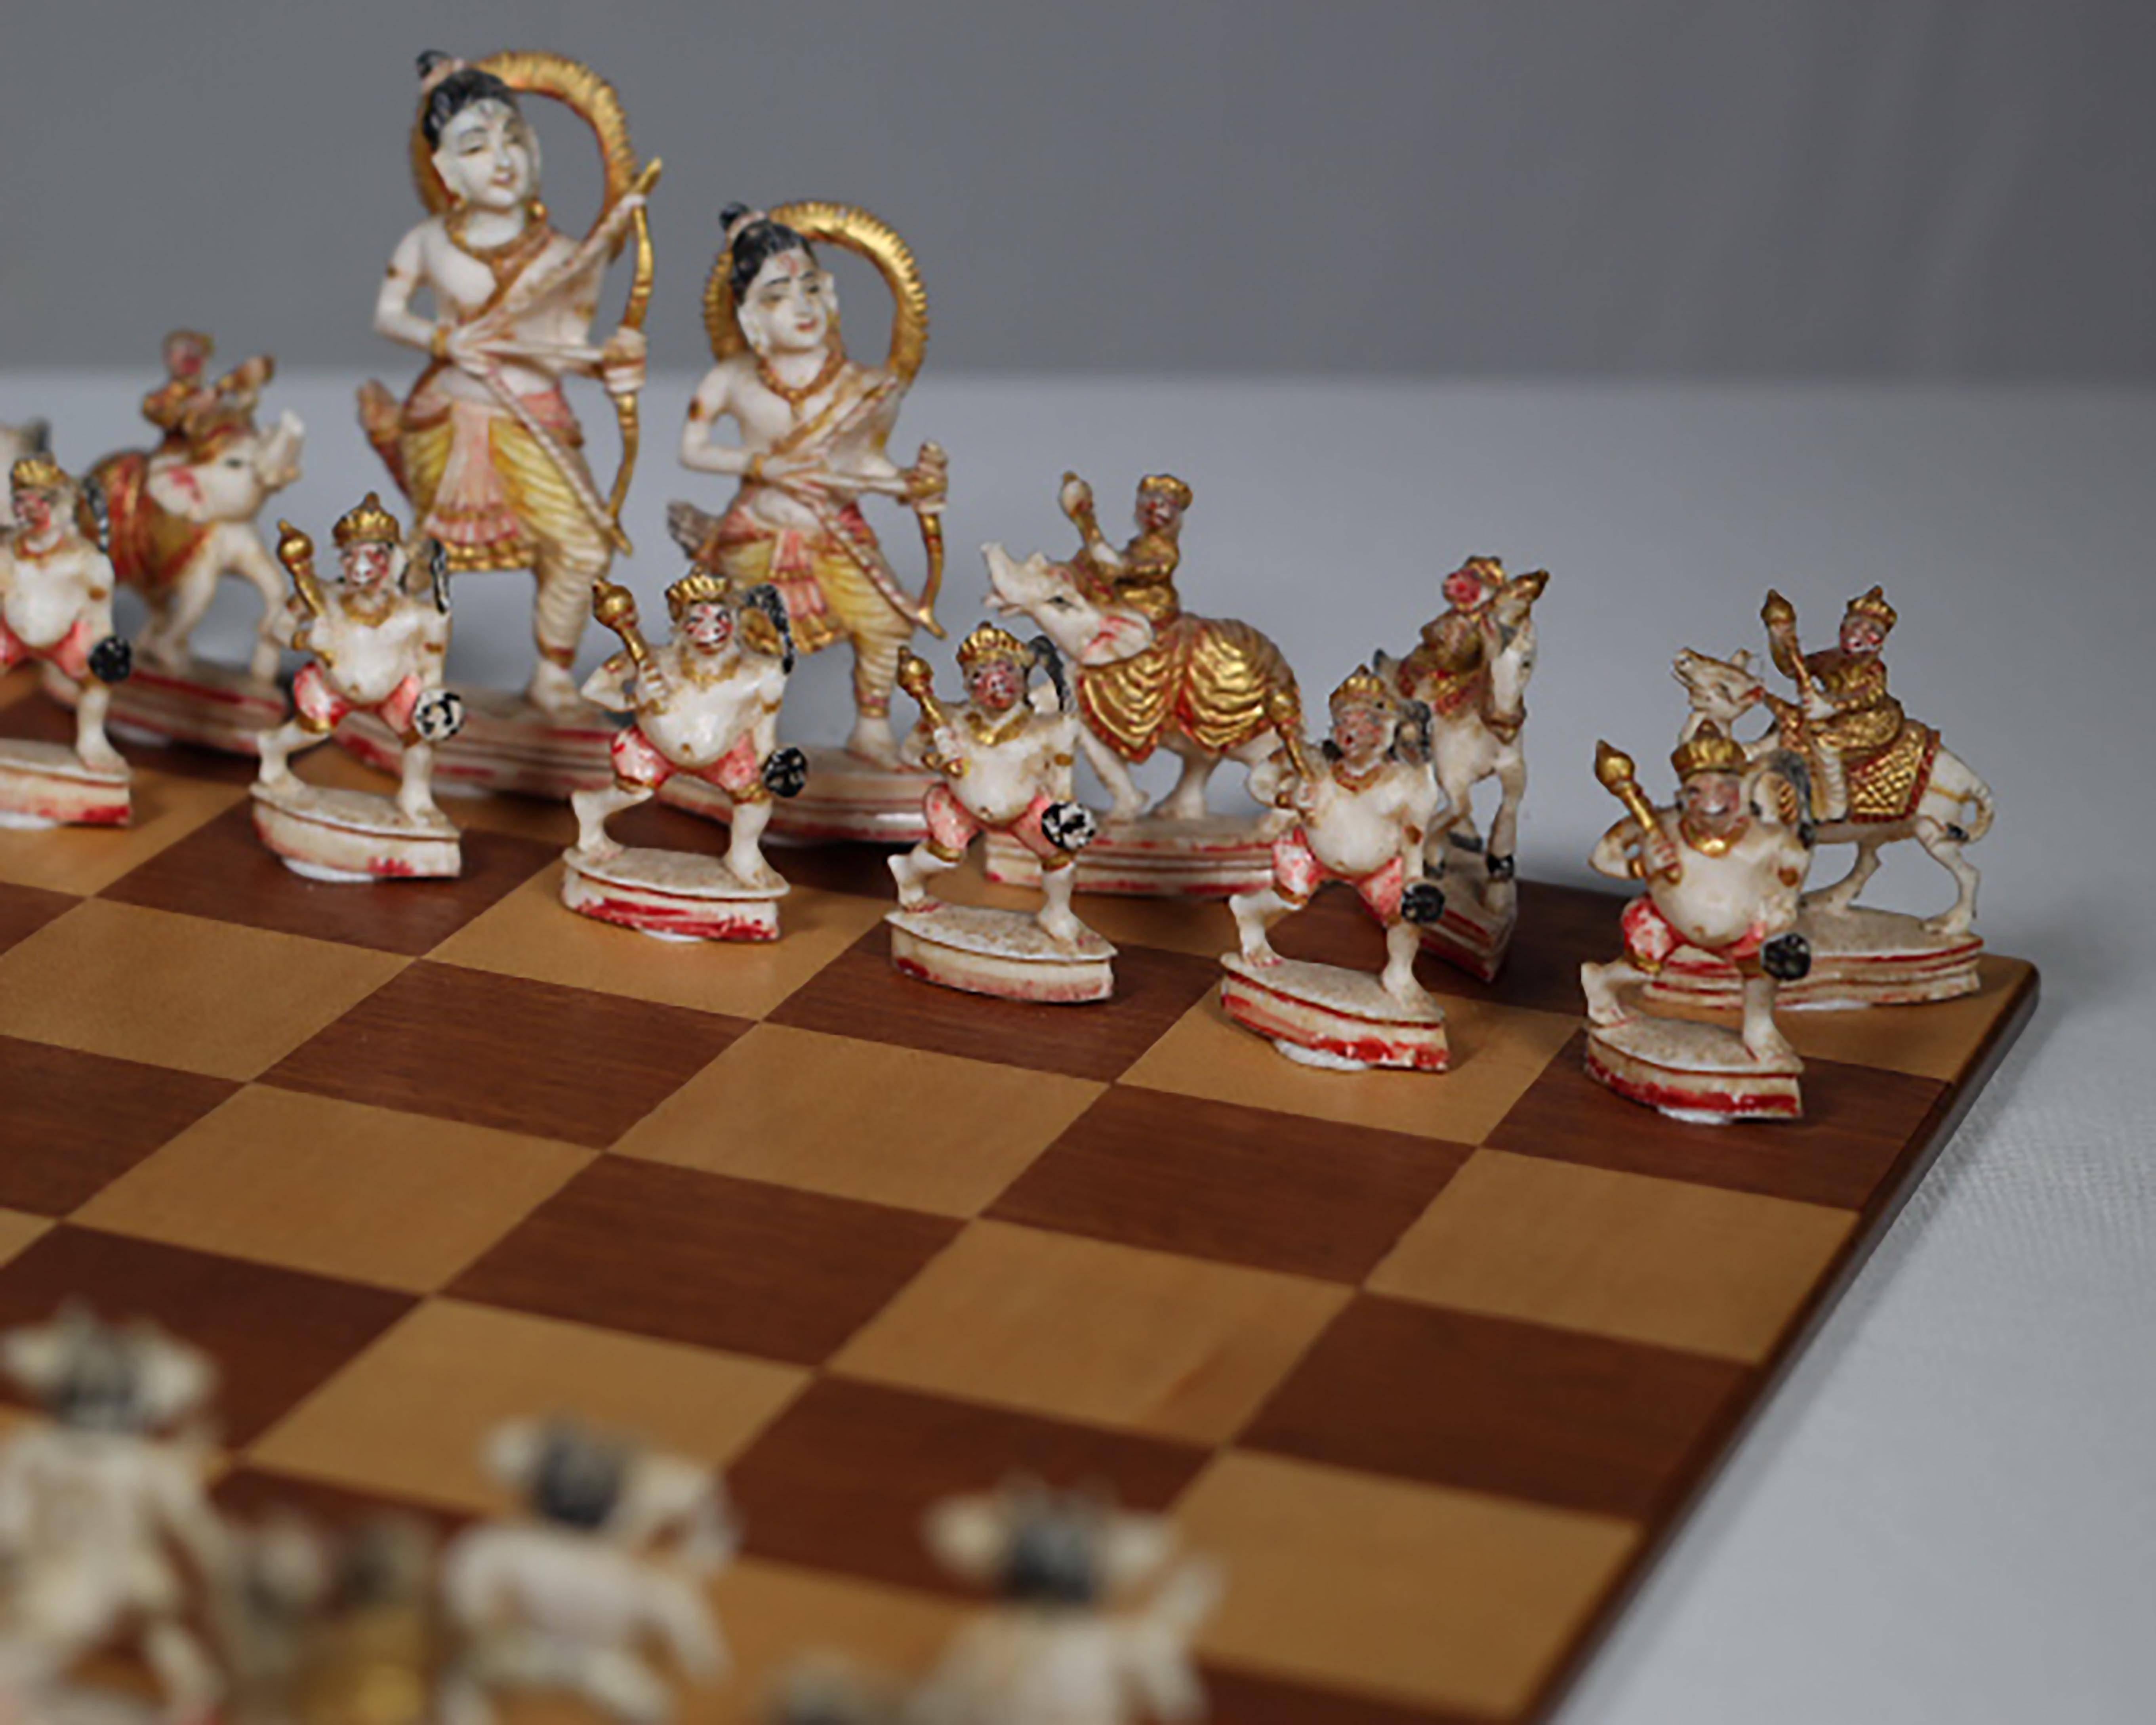 Midcentury chess set with hand-carved bone chess pieces depicting various deities and wooden chess board. Original velvet carrying case lined in fabric.
Overall condition: Good, five pieces have some minor structural damage denoted in last photo.